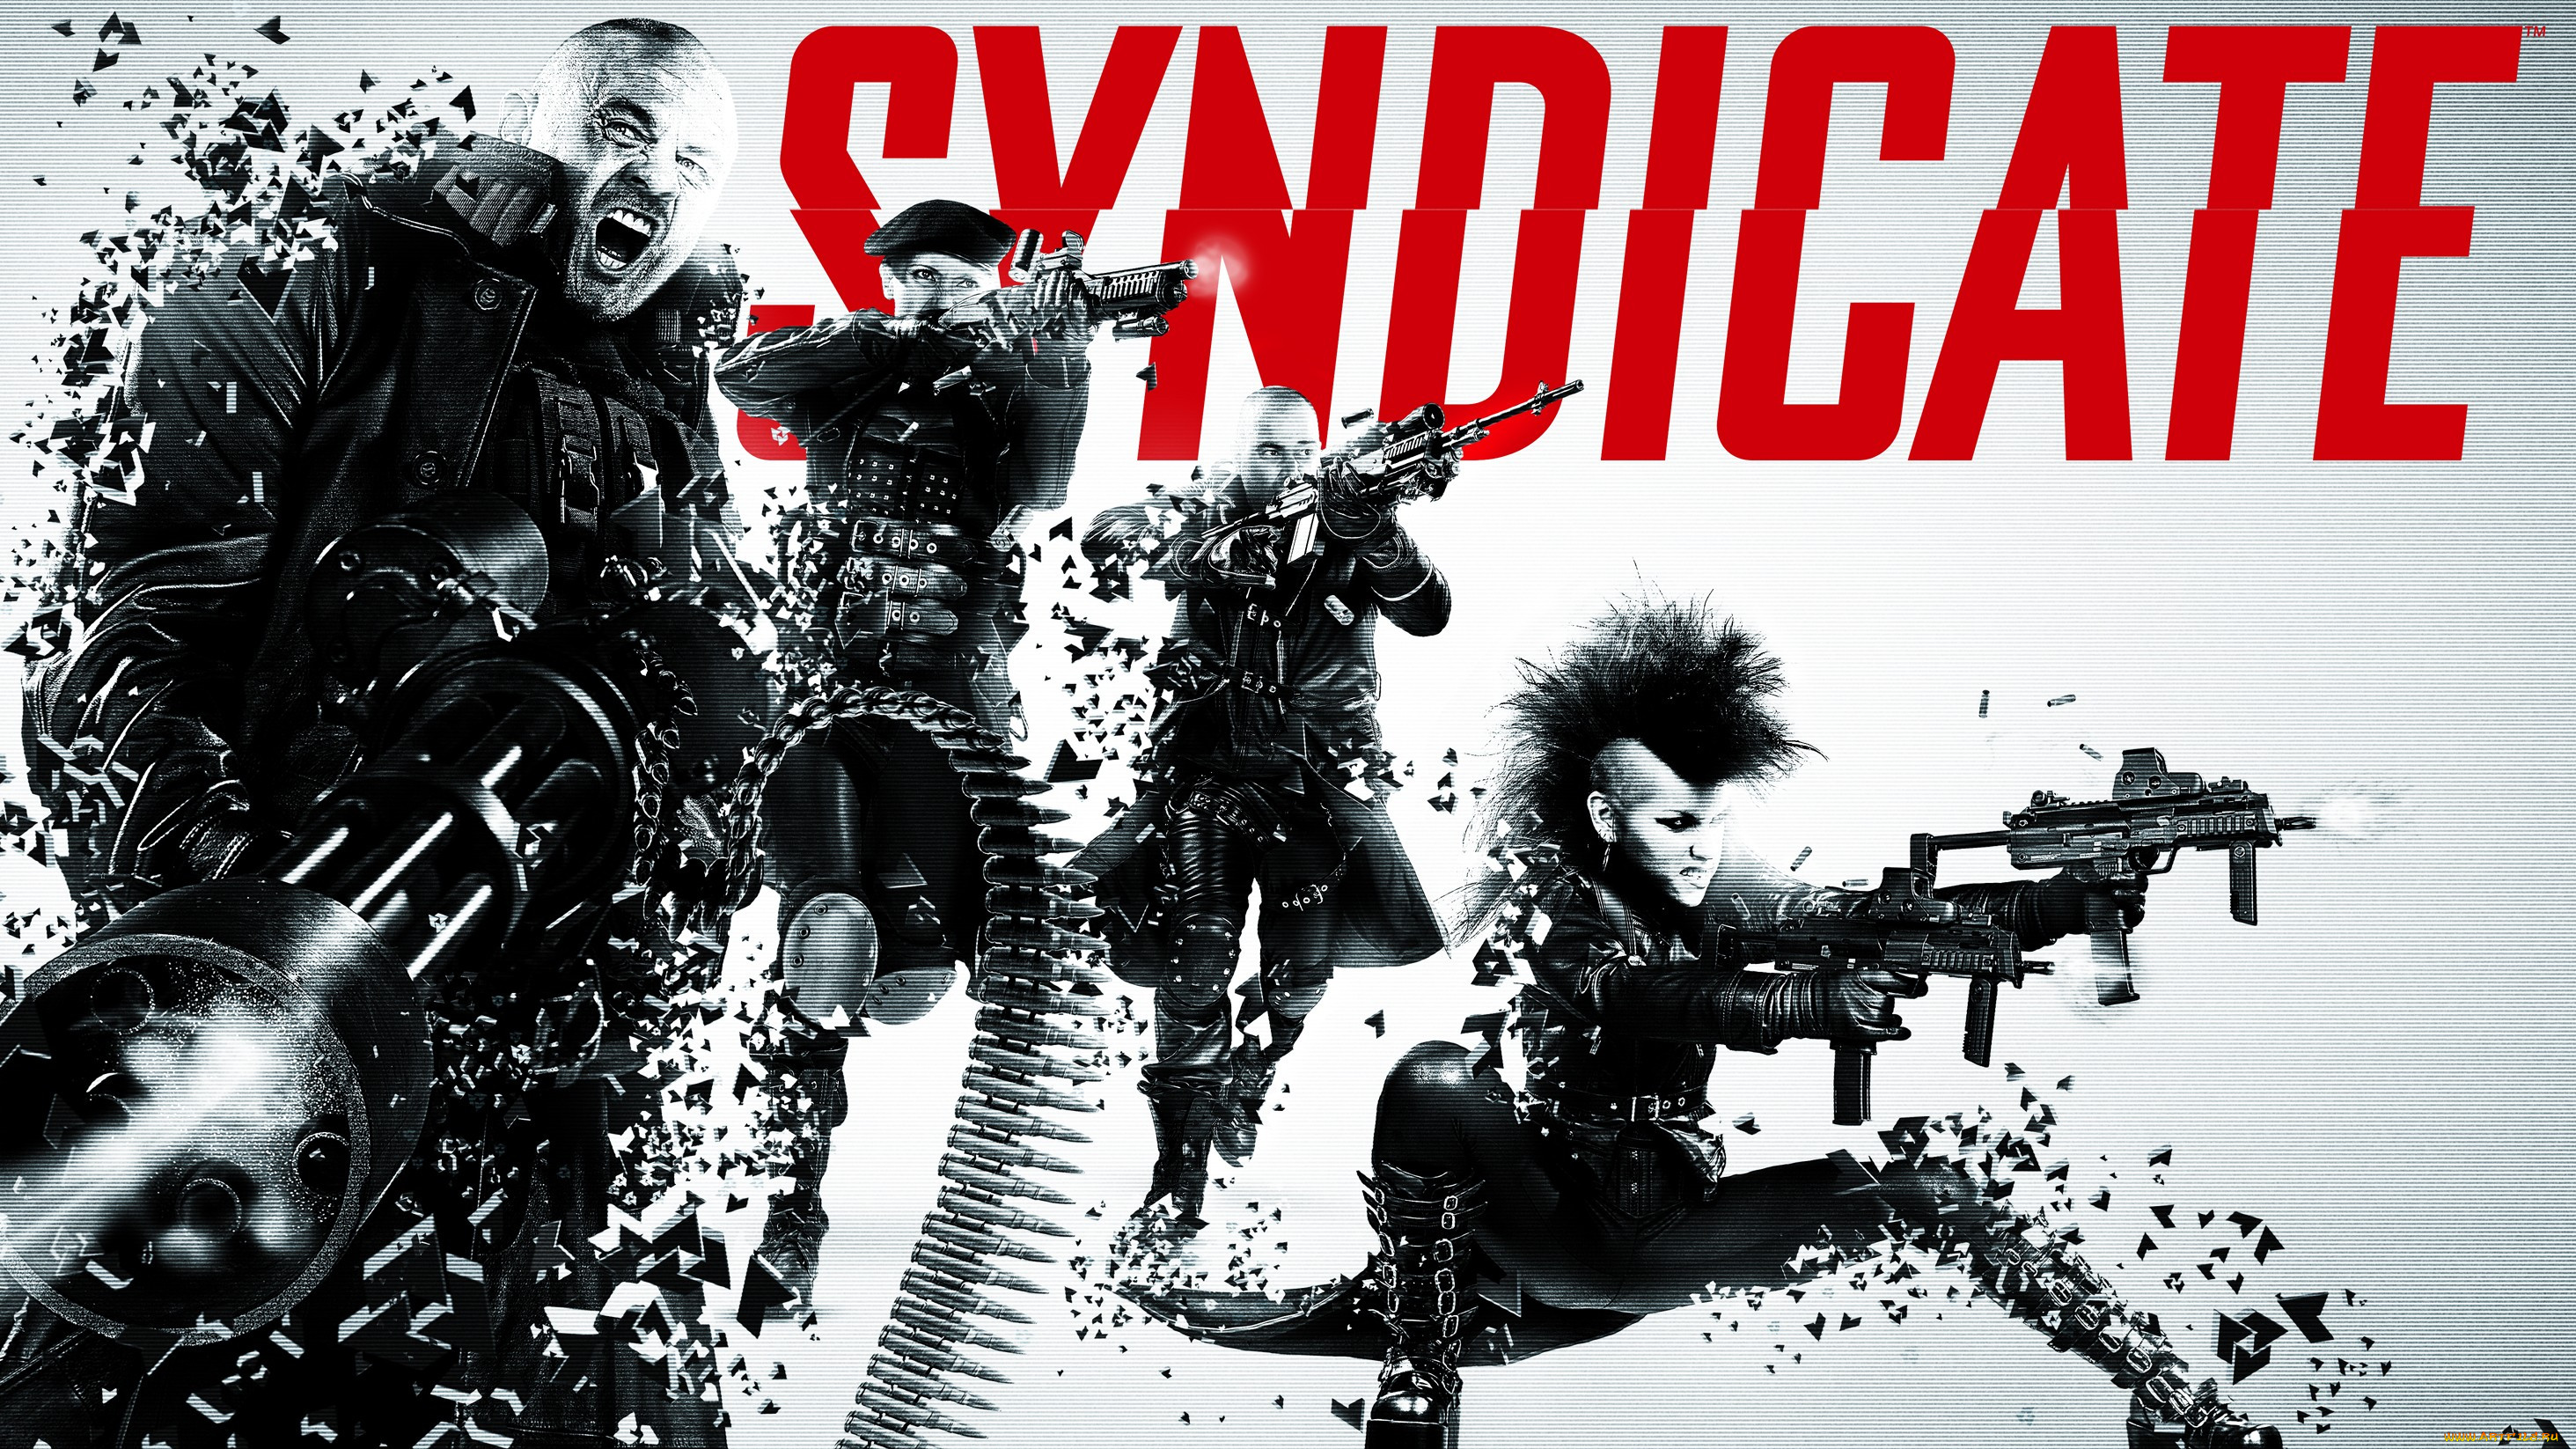 , , syndicate